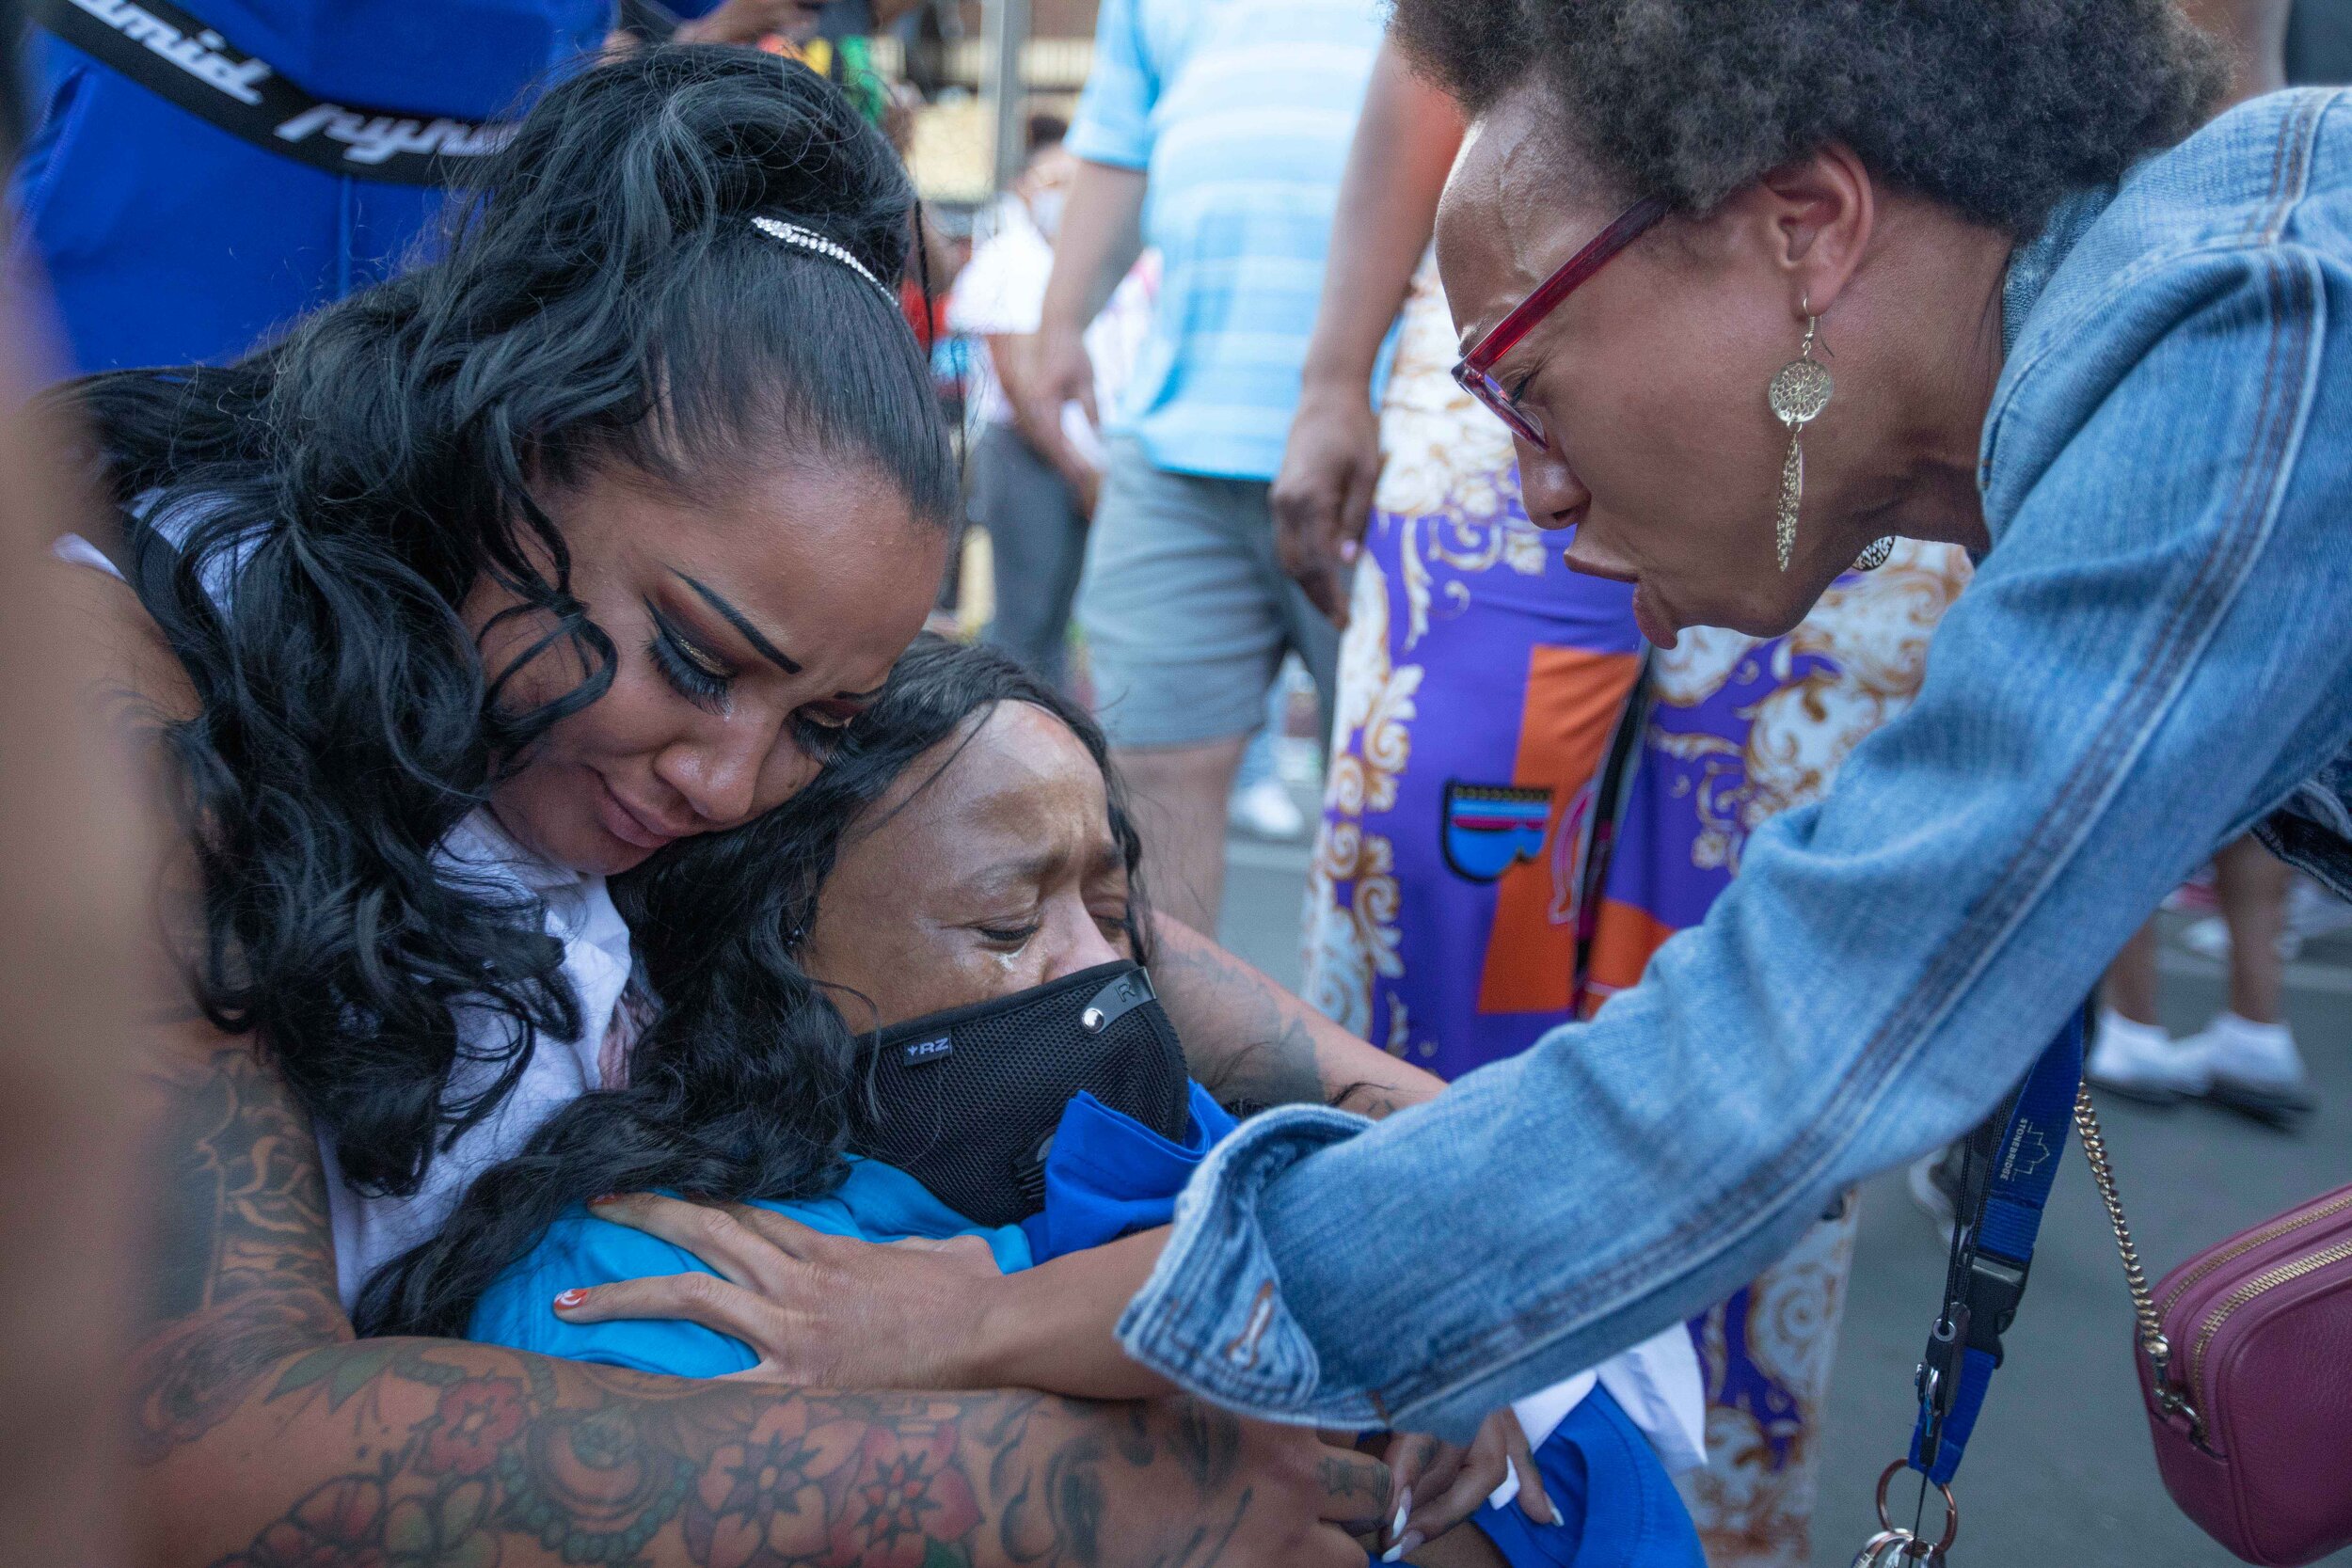  While doing a group prayer and being prayed over, a women breaks down in tears as multiple people pray over her at the George Floyd memorial site in Minneapolis, Minnesota on Jun 14, 2020. 